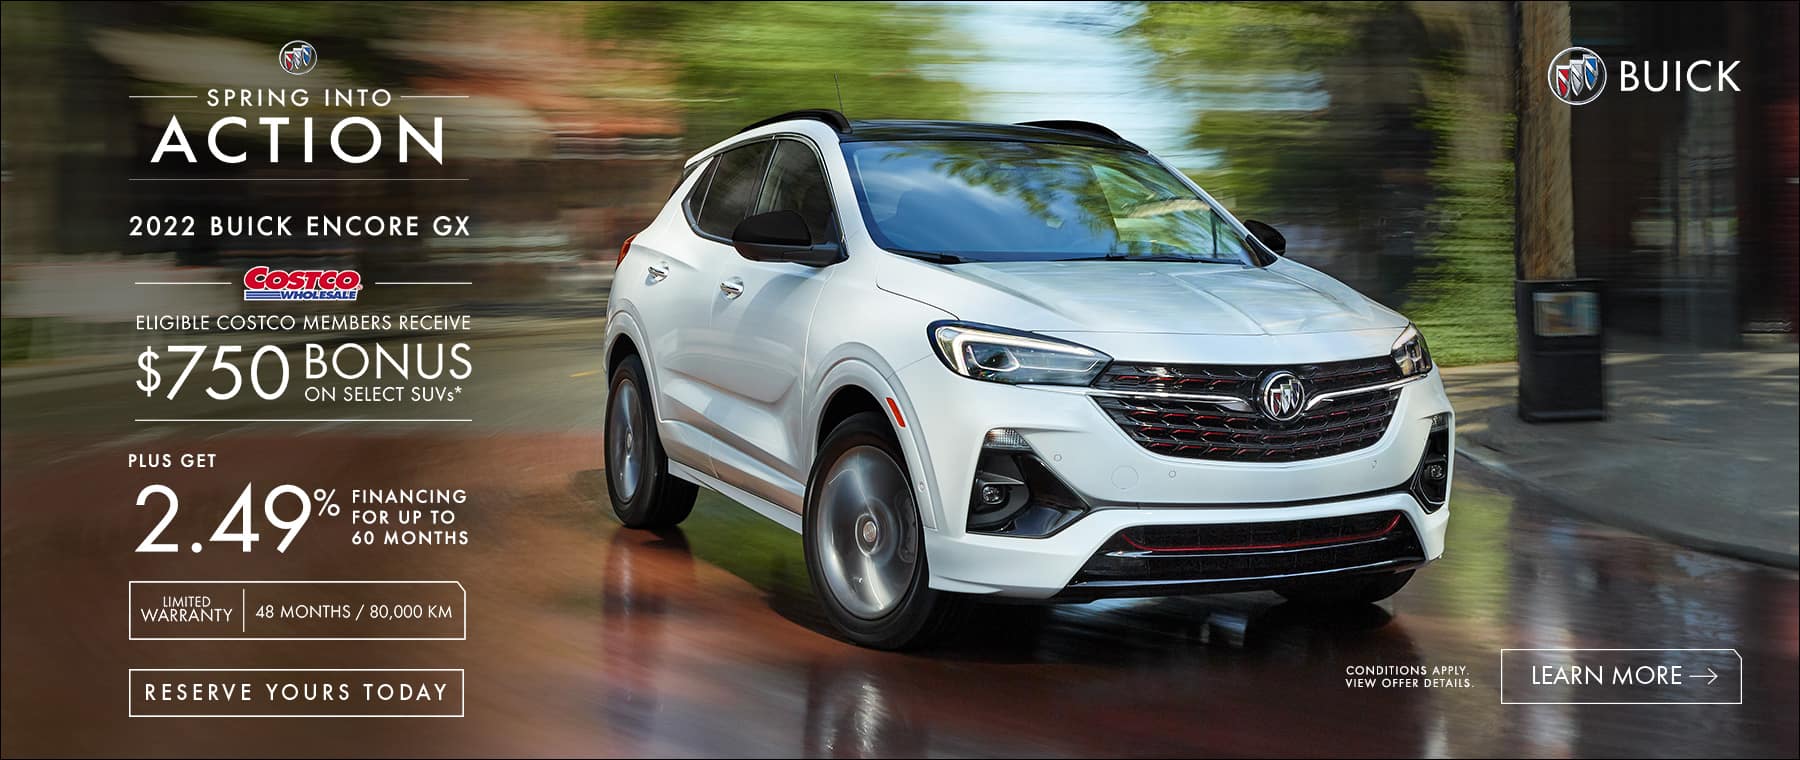 Spring Into Action – 2022 Buick Encore GX